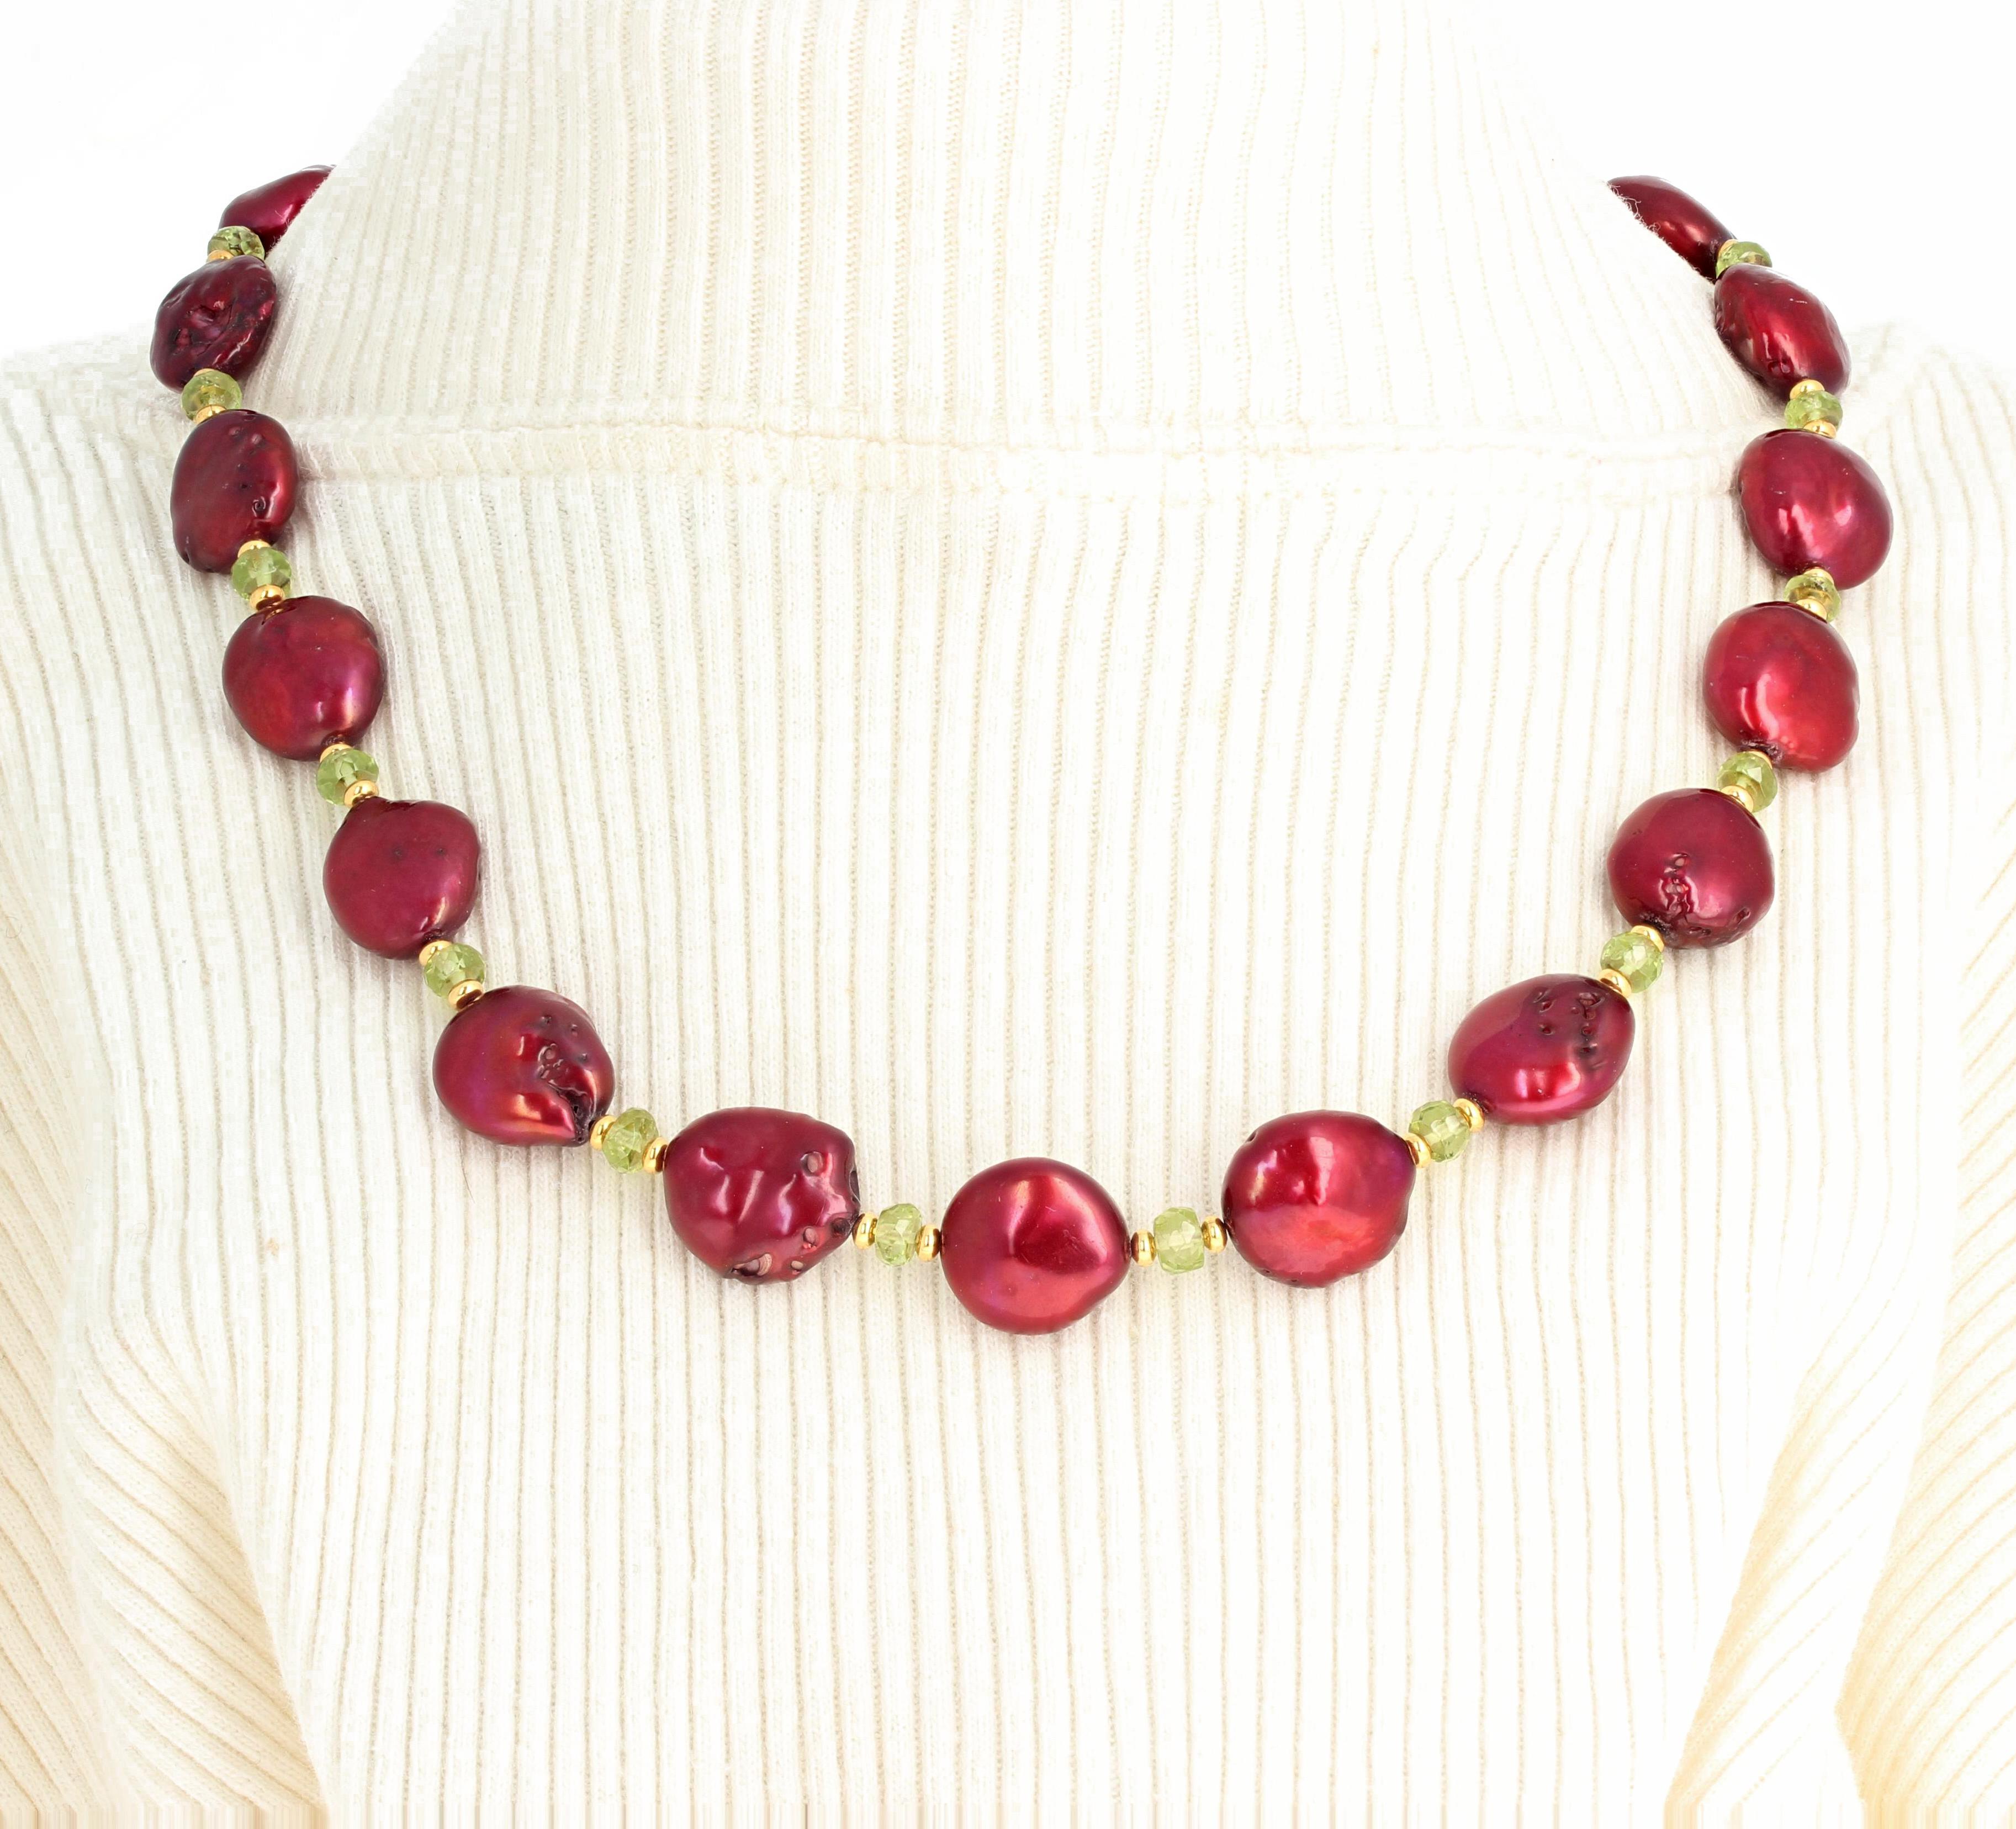 Brilliant wine red oval imperfect cultured Pearls enhanced with glowing checkerboard gem cut Peridot and little goldy color shining spacers.  This unique necklace is handmade and is 18 inches long with a gold tone toggle clasp.  